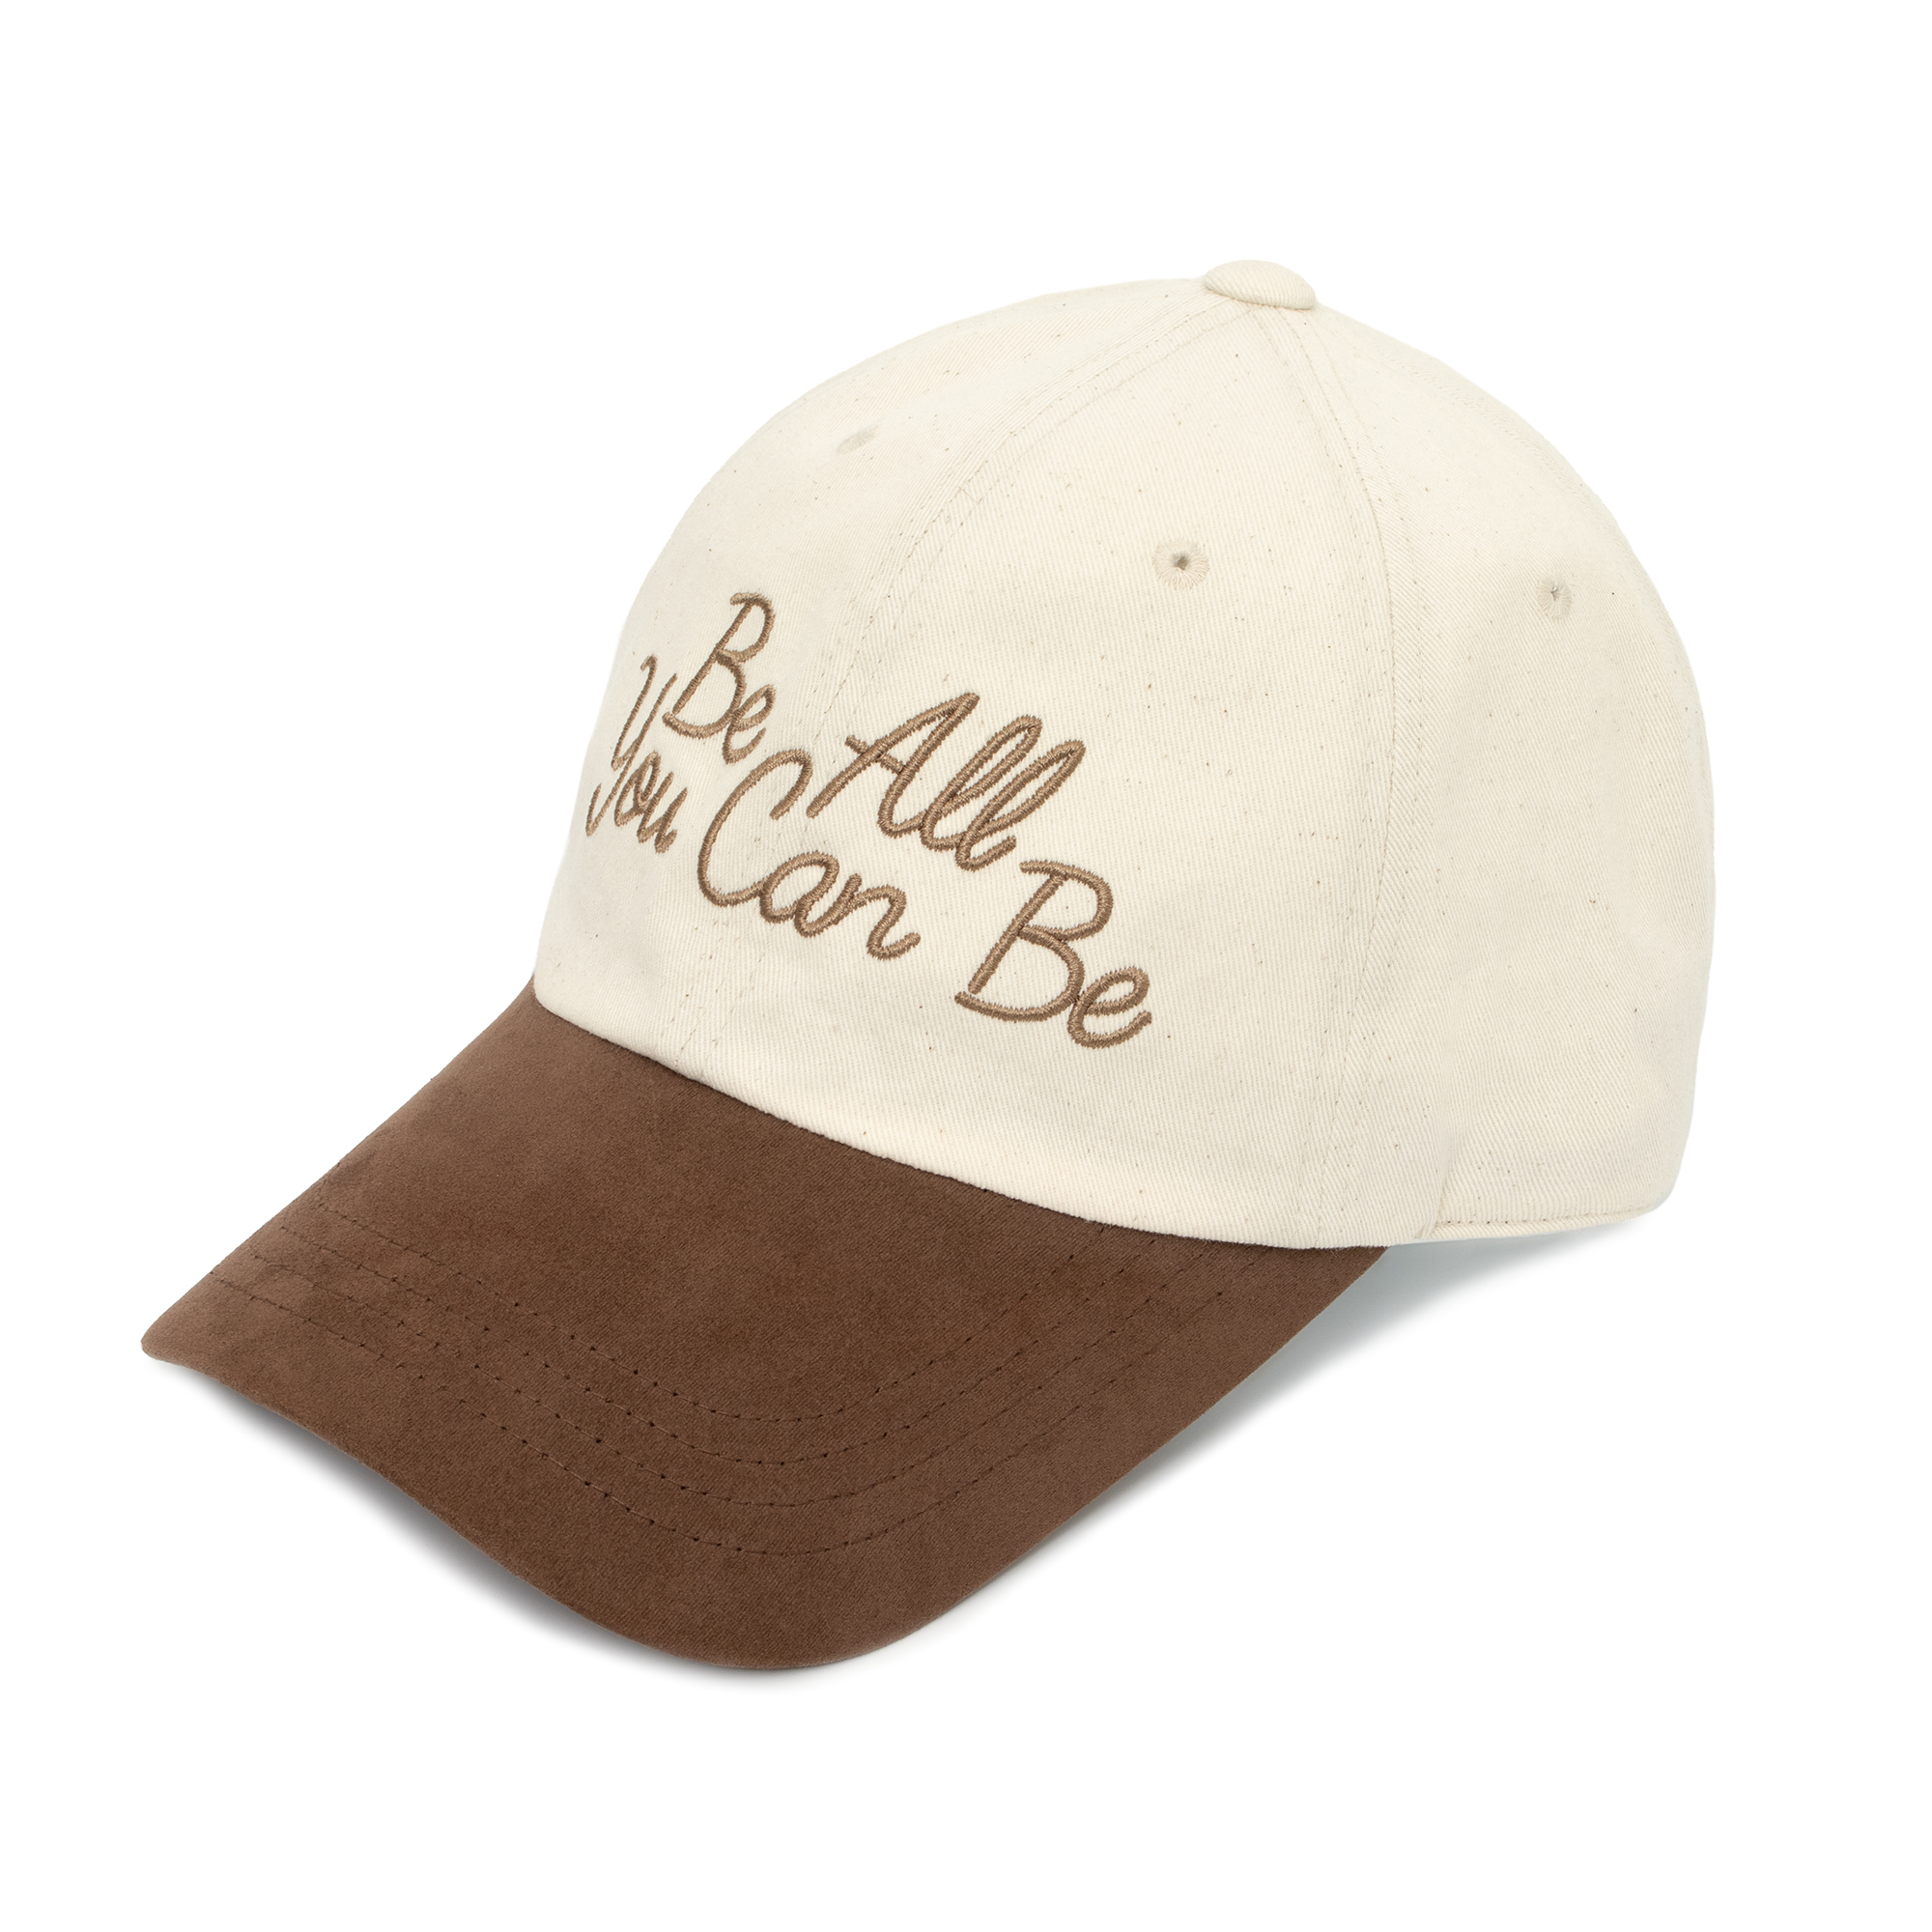 HW-BC164 : “Be All You Can Be” Suede Brim CapㅣIvory Browm